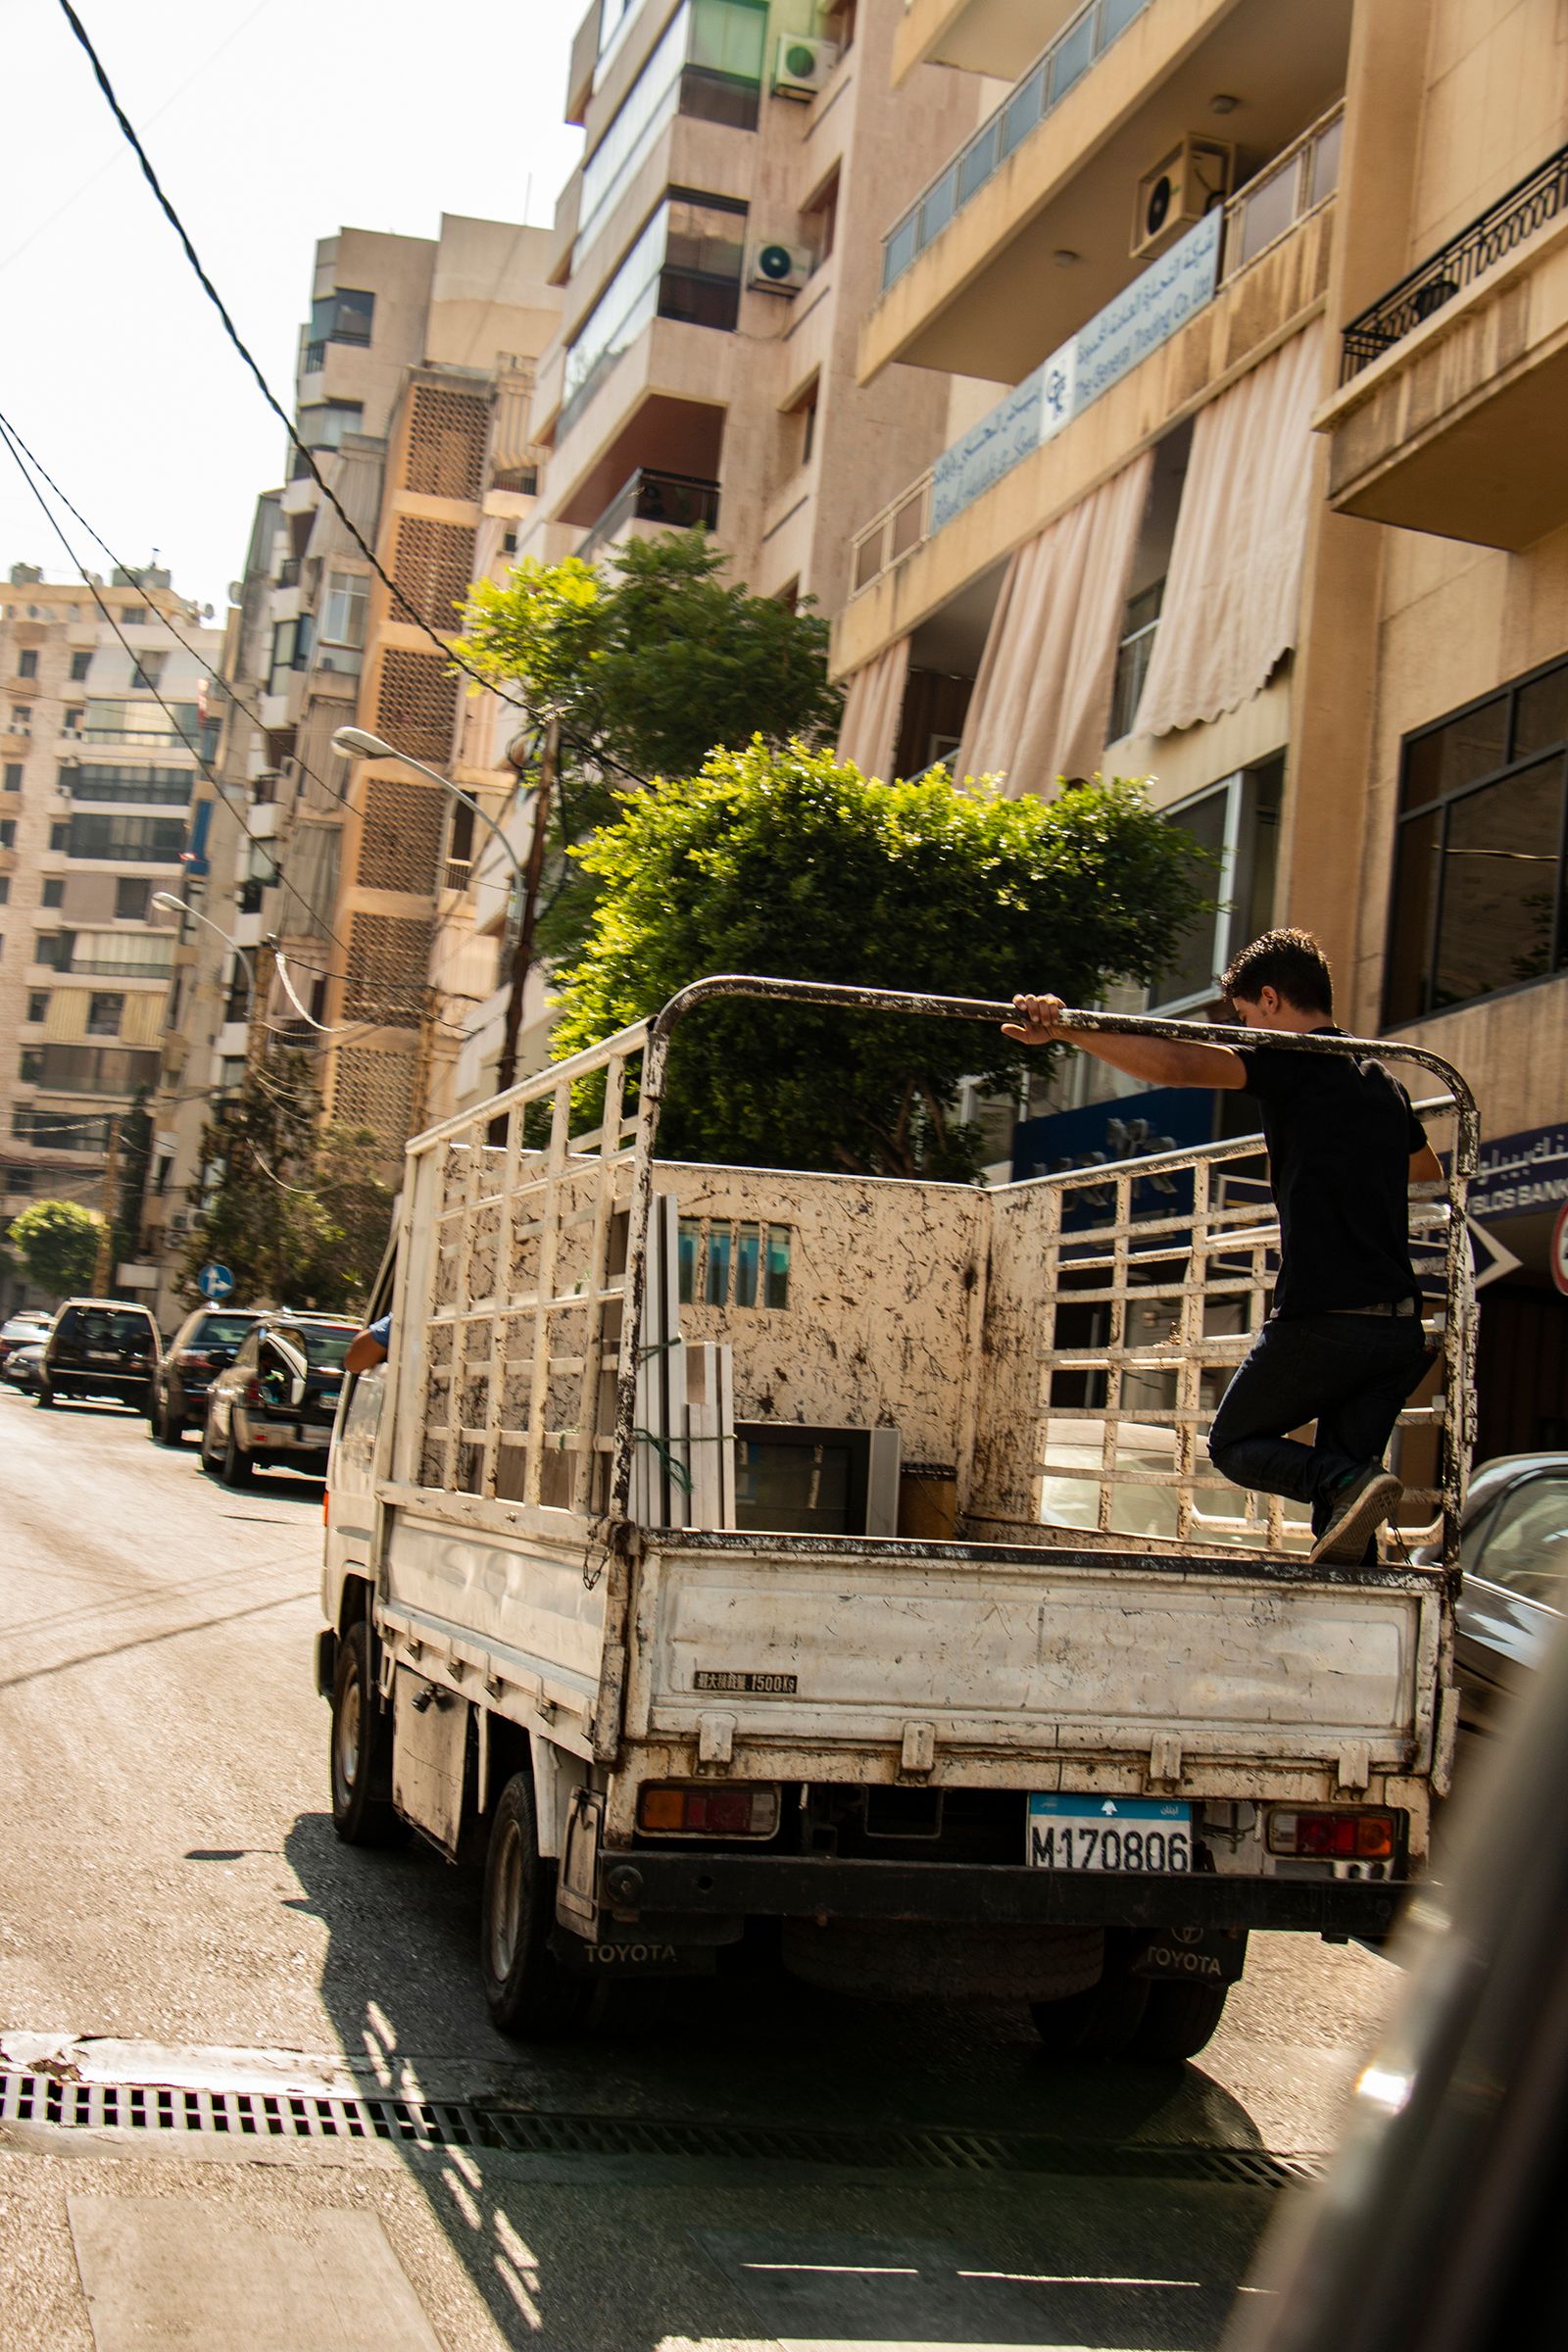 © Malak Wazne - Child Of Lebanon | A child stands in the trunk of a moving truck.